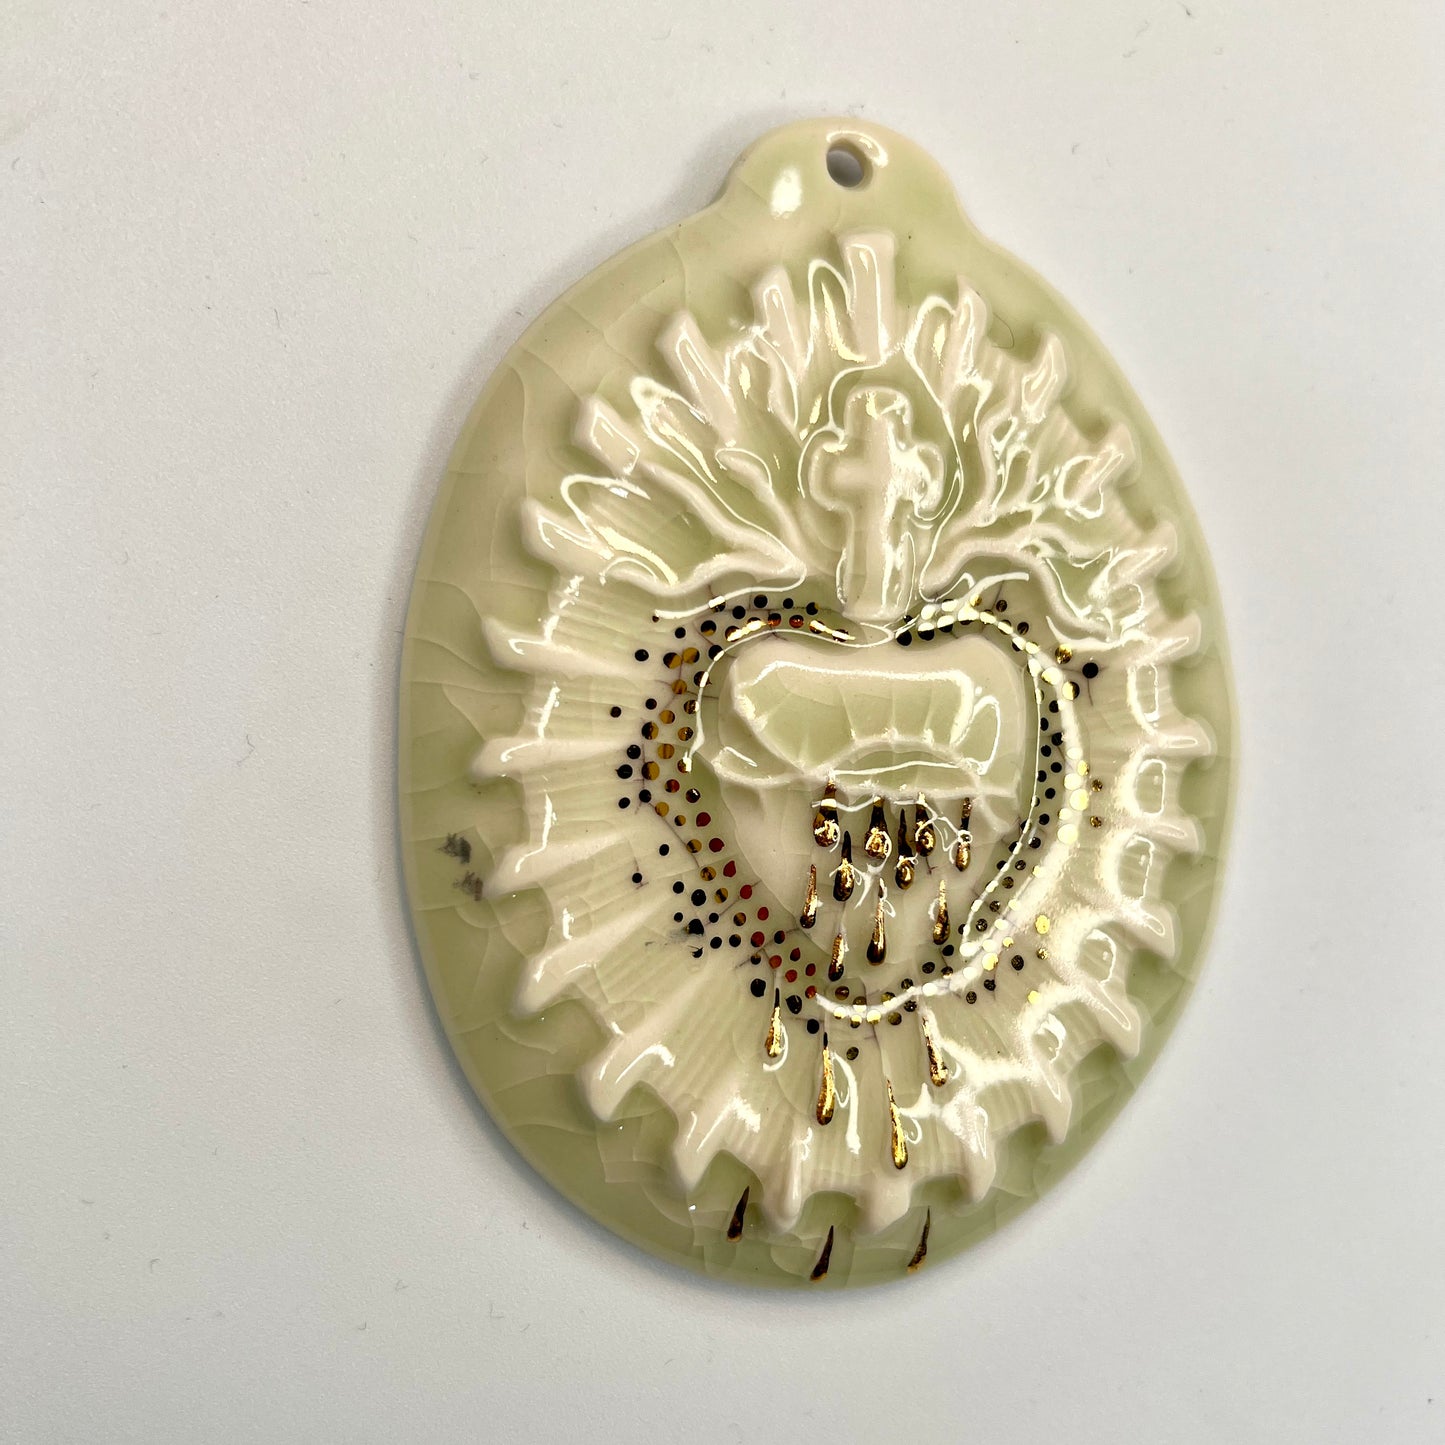 Product Image: Sacred Heart 6 - Hand crafted Porcelain Home Ornament. Bleeding Sacred Heart in thorns.